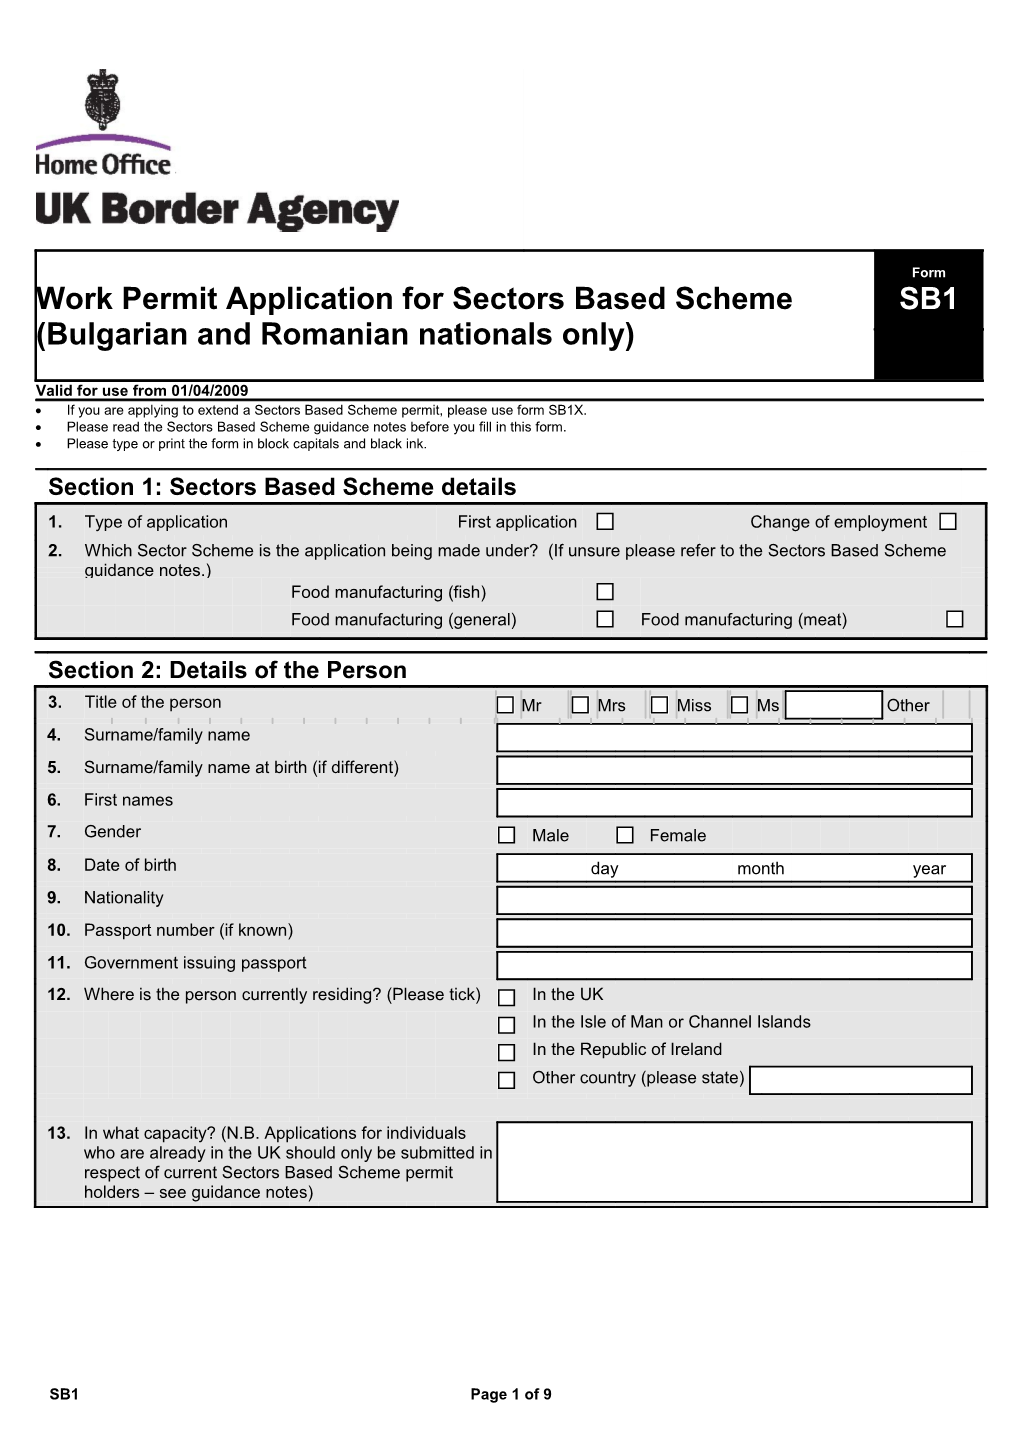 Work Permit Application for Sectors Based Scheme